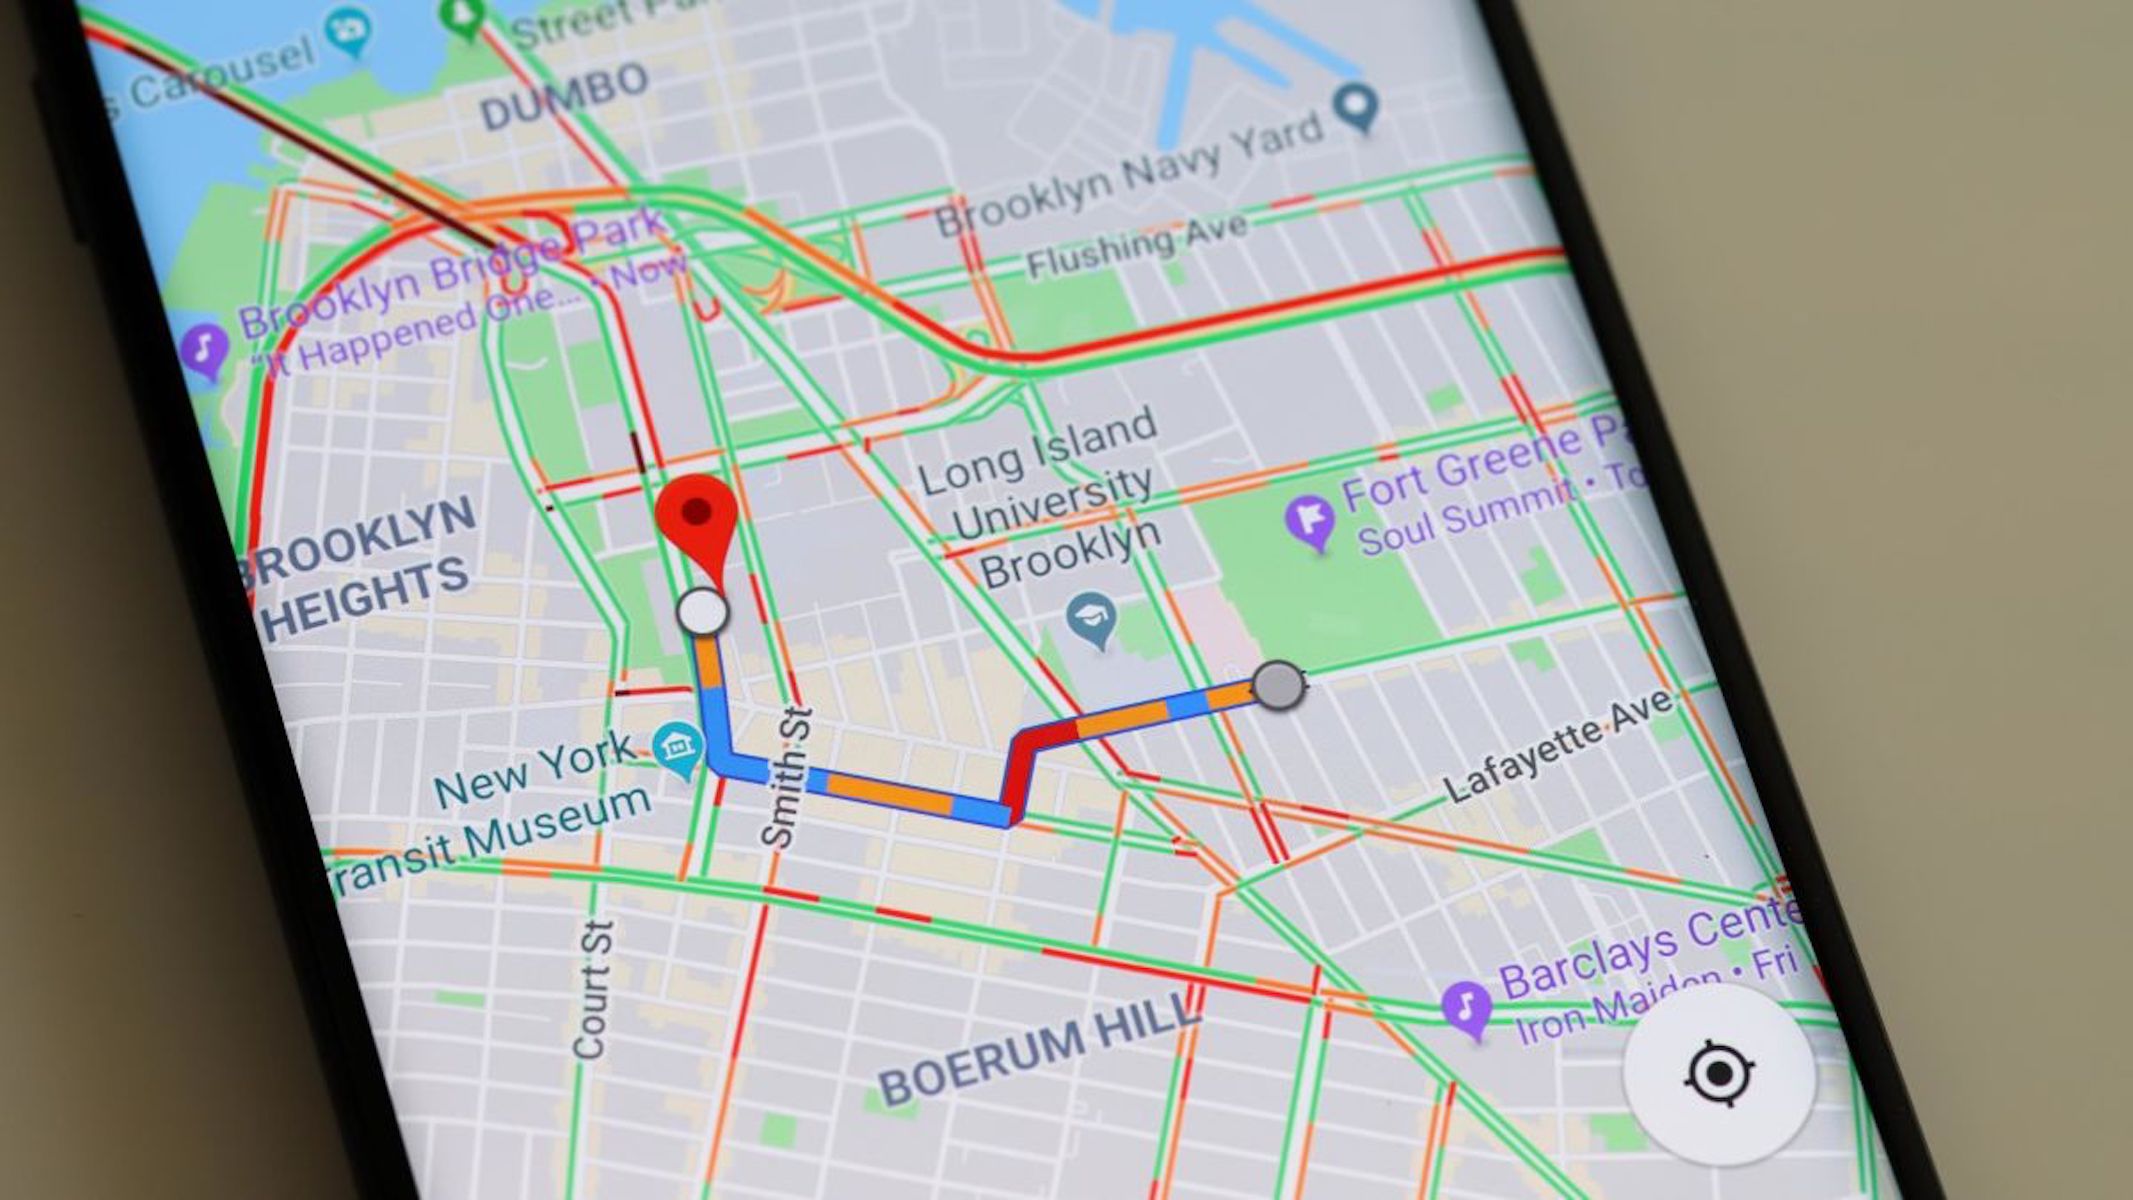 Google Maps will now provide speed alerts while driving